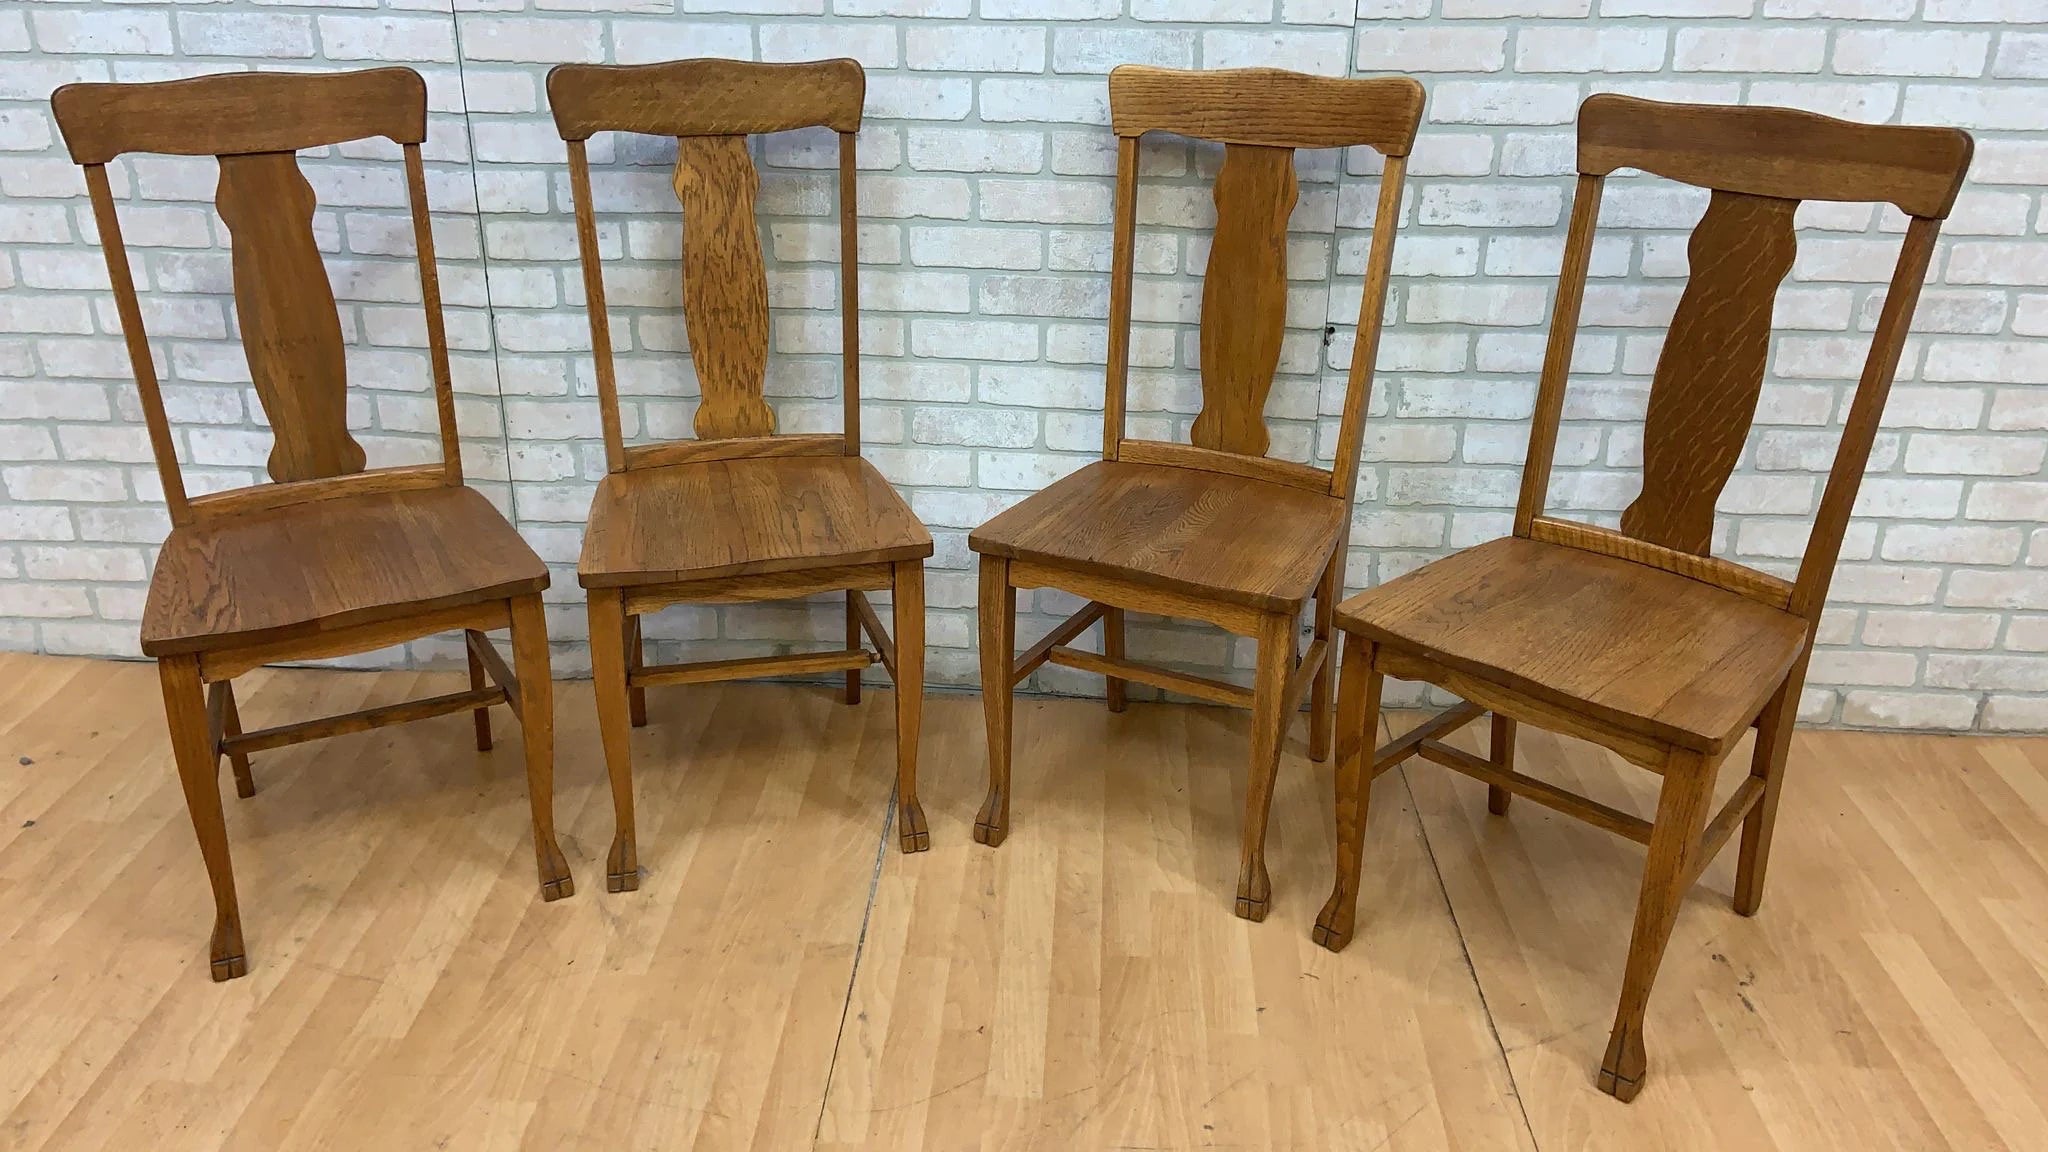 Antique Quarter Sawn Oak Carved Extention Dining/Game Table with 4 Chairs and 2 Leaves - 7 Item Set